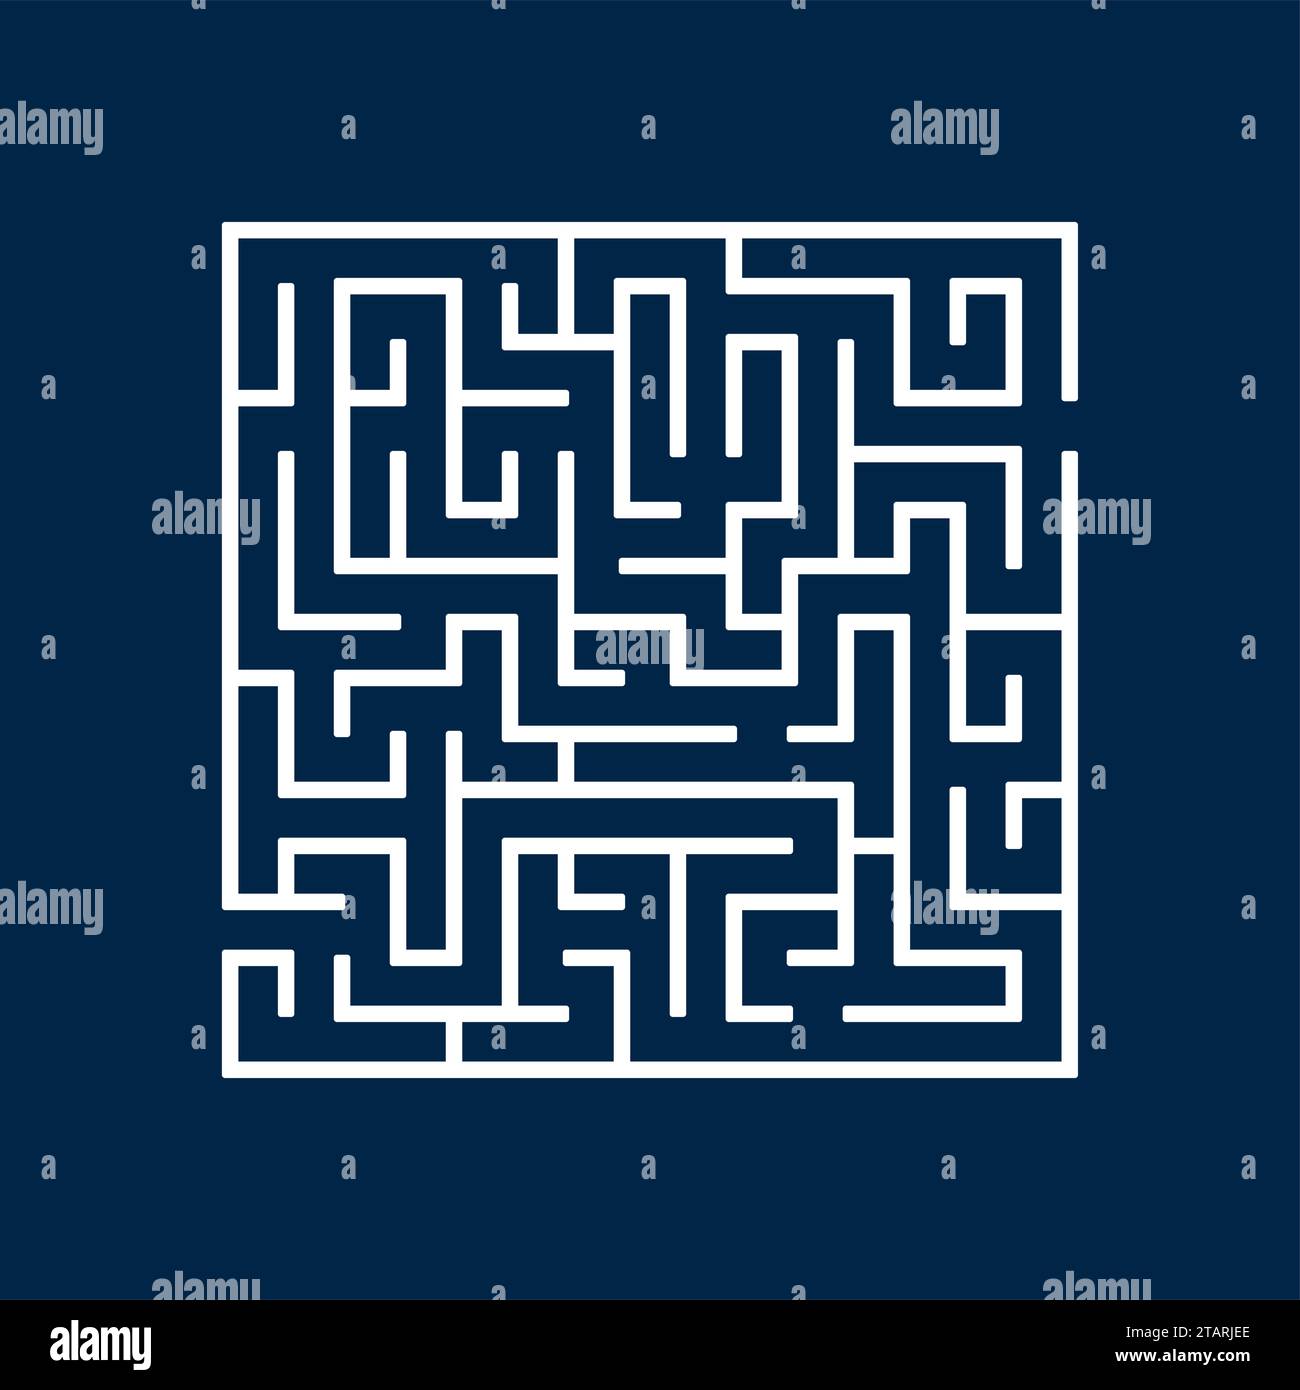 Vector illustration of Maze or Labyrinth isolated on blue background. Stock Vector